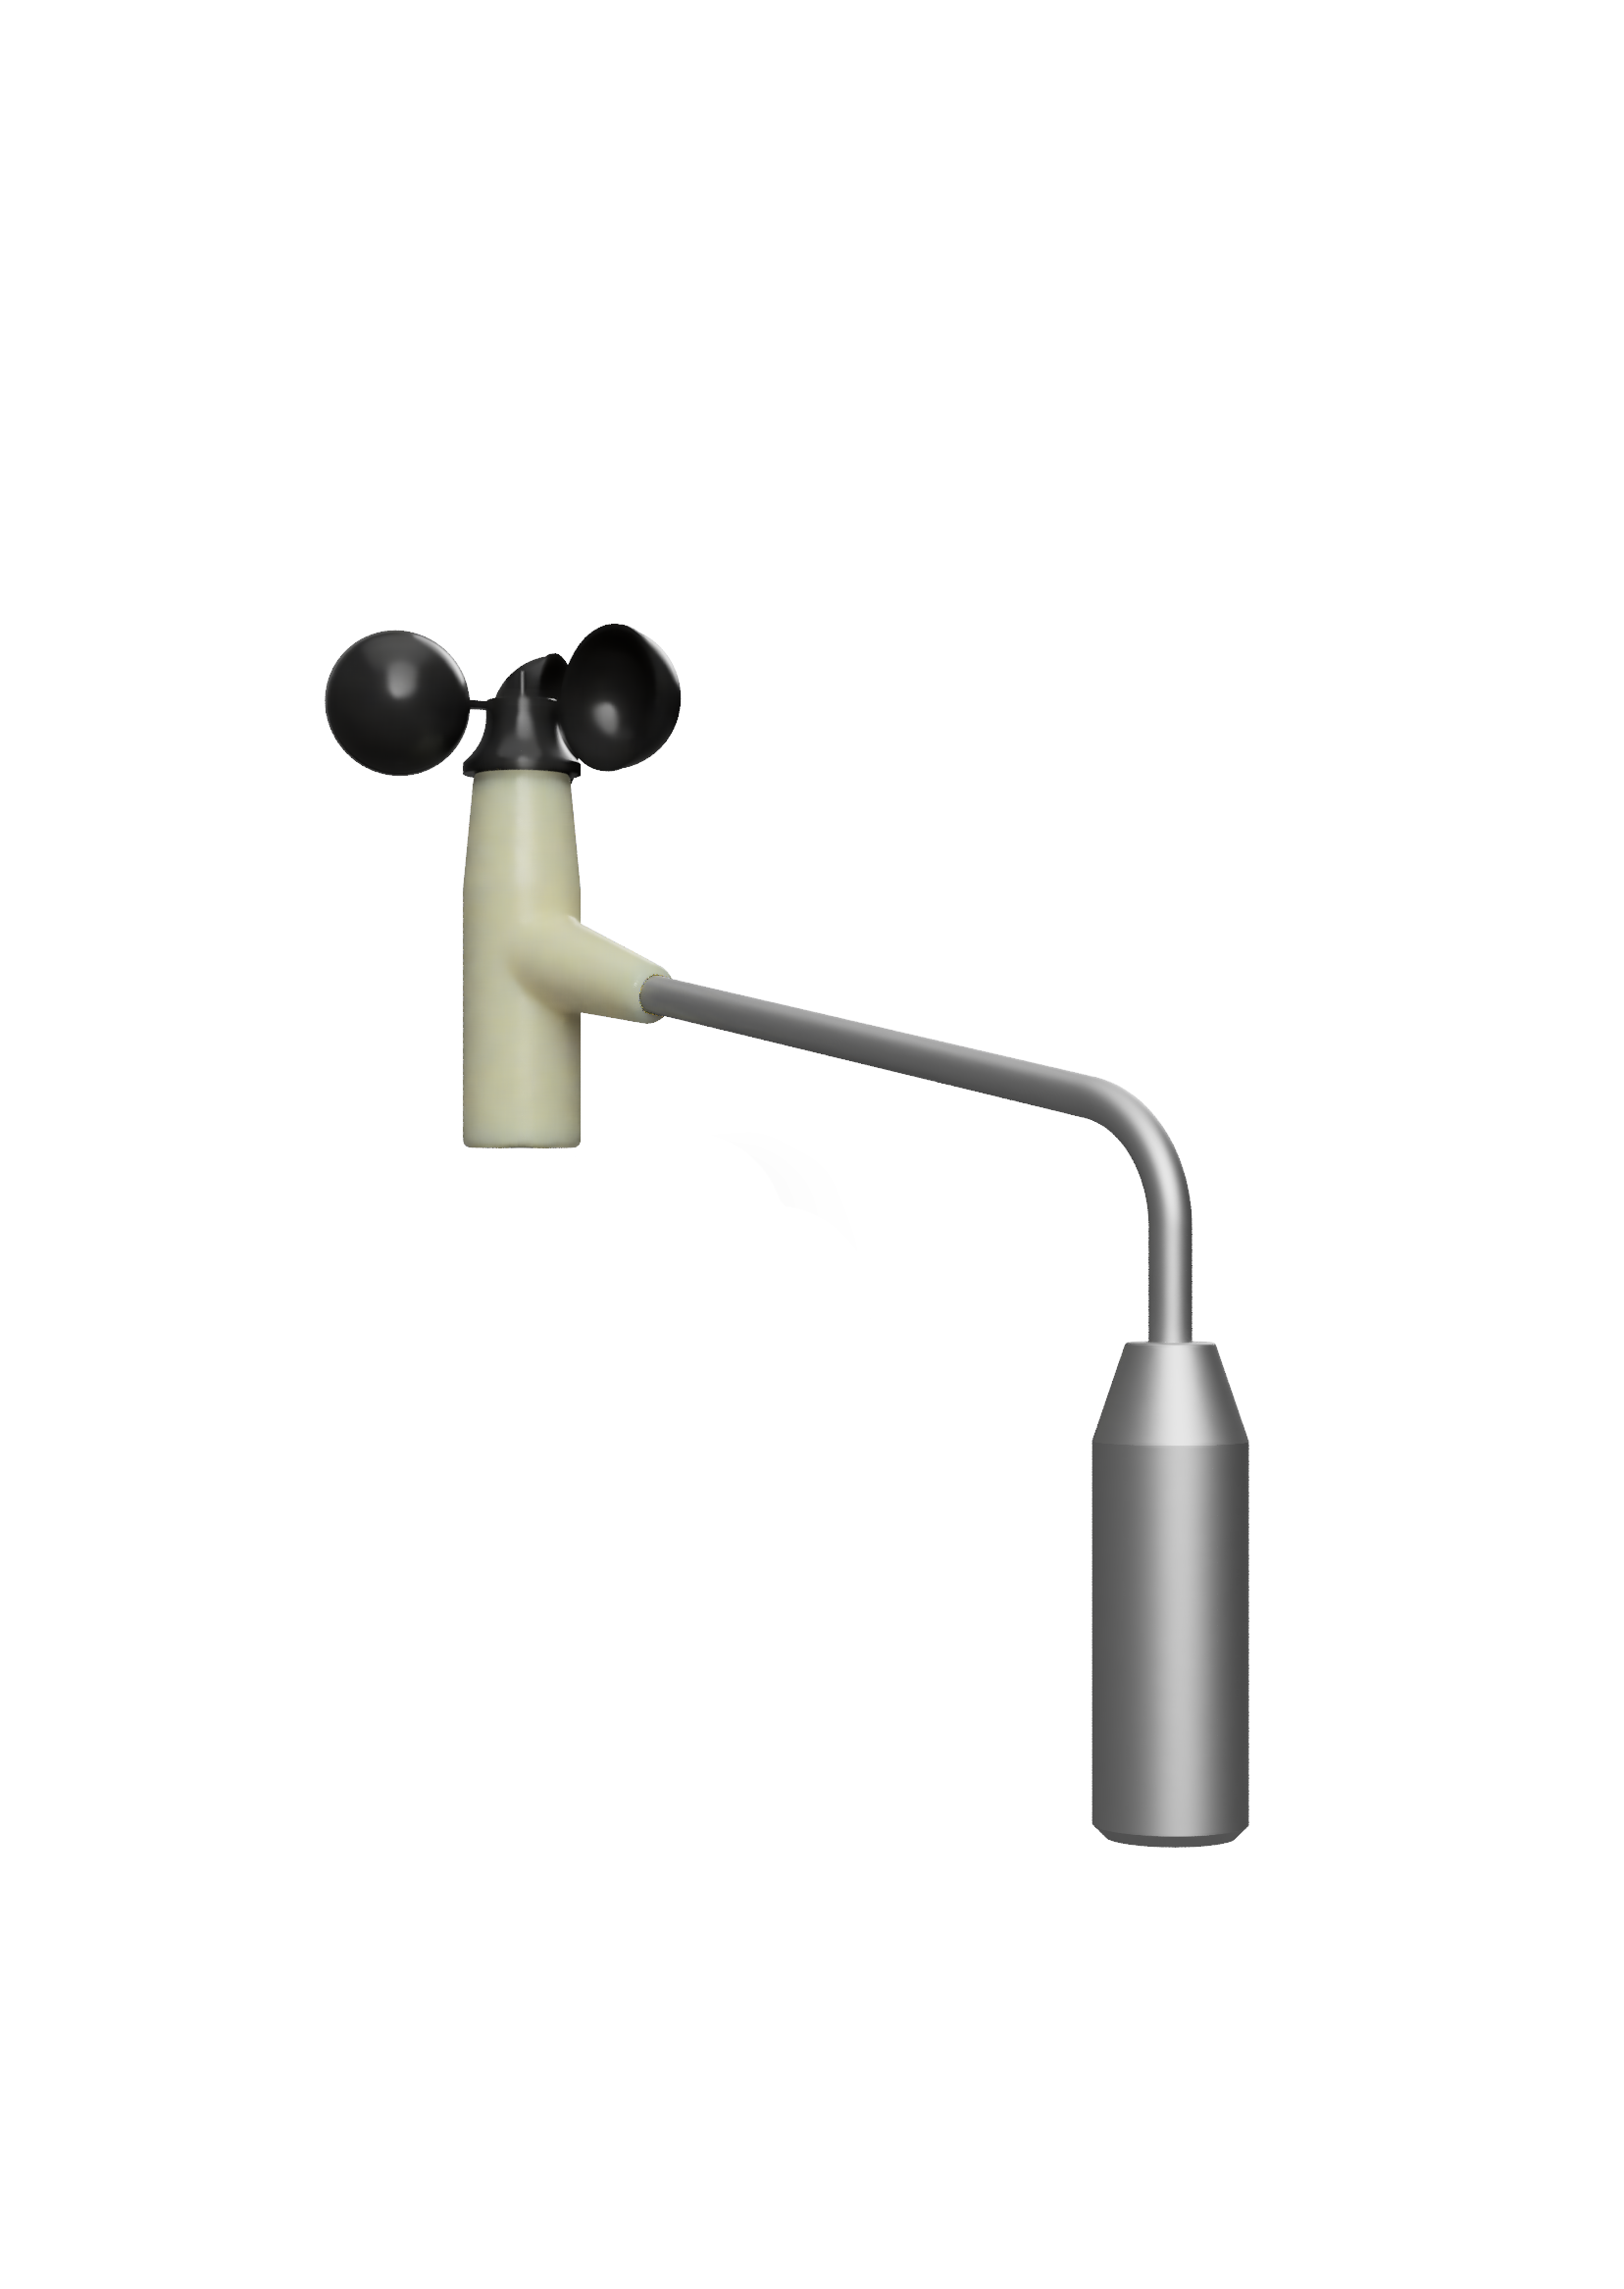 Meteo probe for wind speed (aluminium housing) with voltage output / 0 - 2.1 V  Type: f.556.2.19 with heating